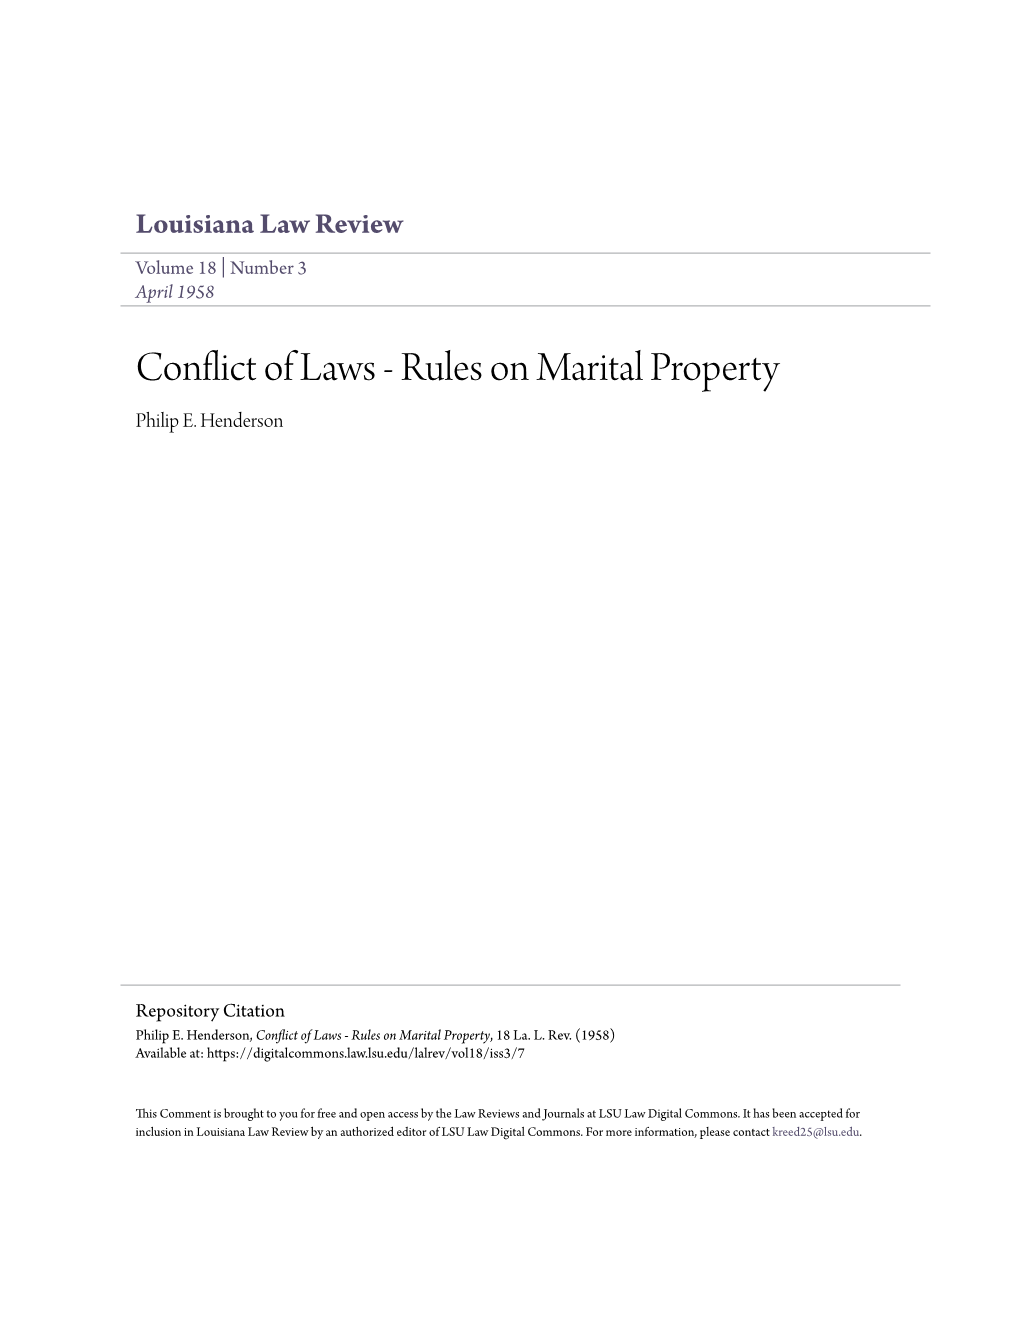 Conflict of Laws - Rules on Marital Property Philip E